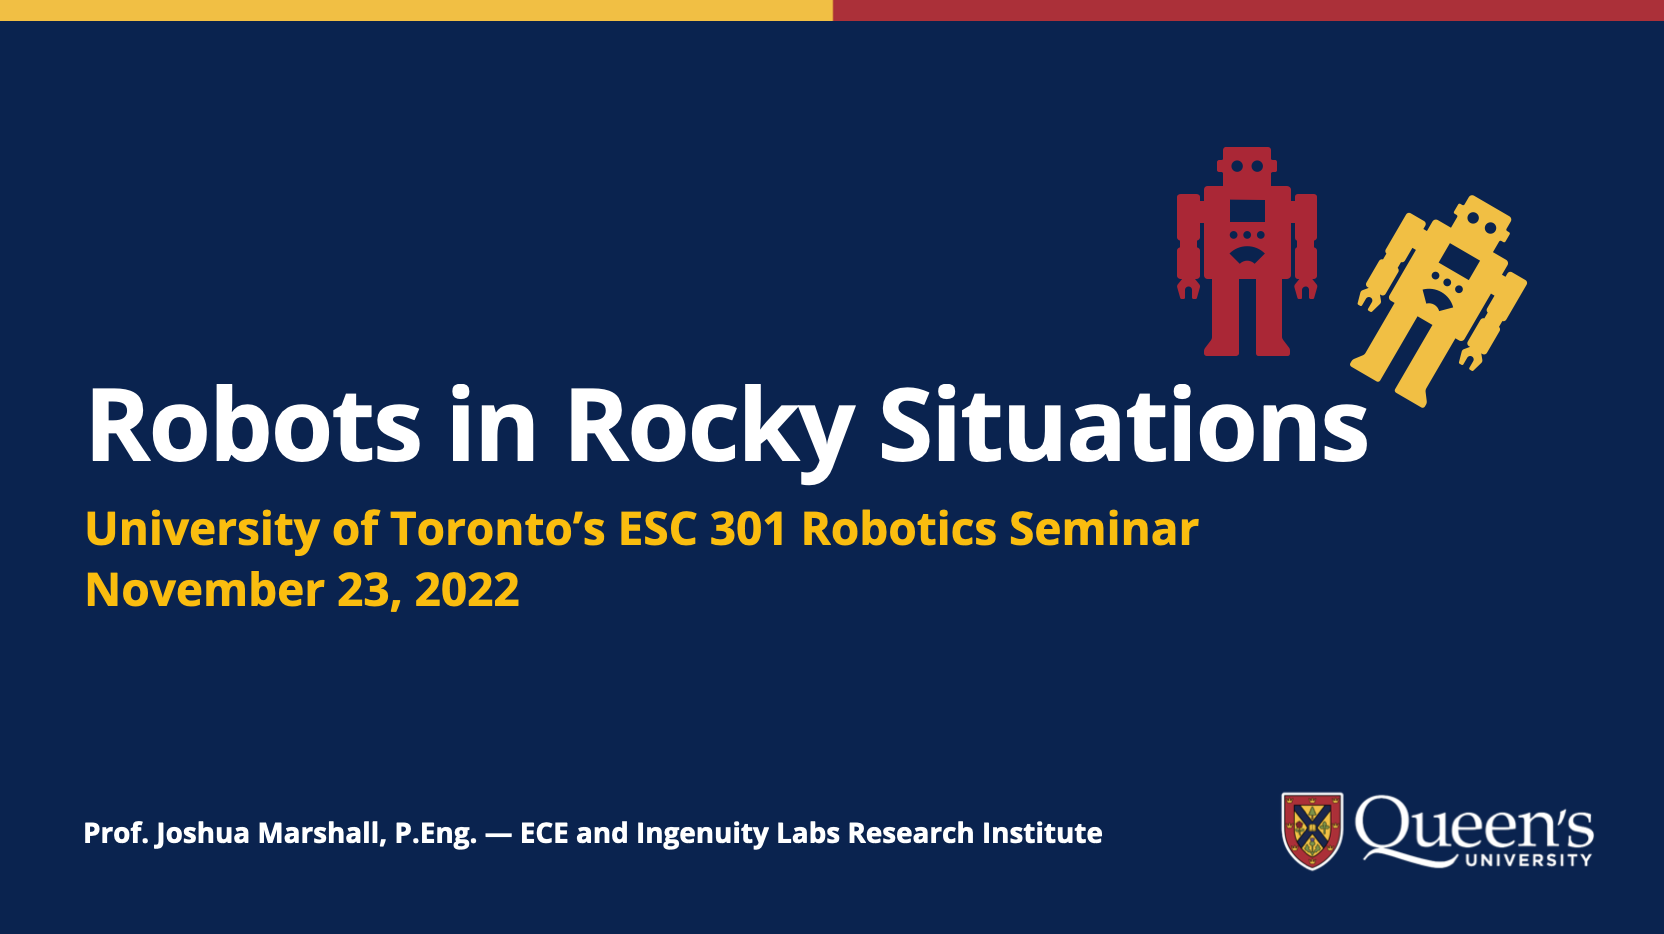 Cover slide for my presentation, called "Robots in Rocky Situations", delivered on November 23, 2022 at the University of Toronto's ESC 301 Robotics Seminar.